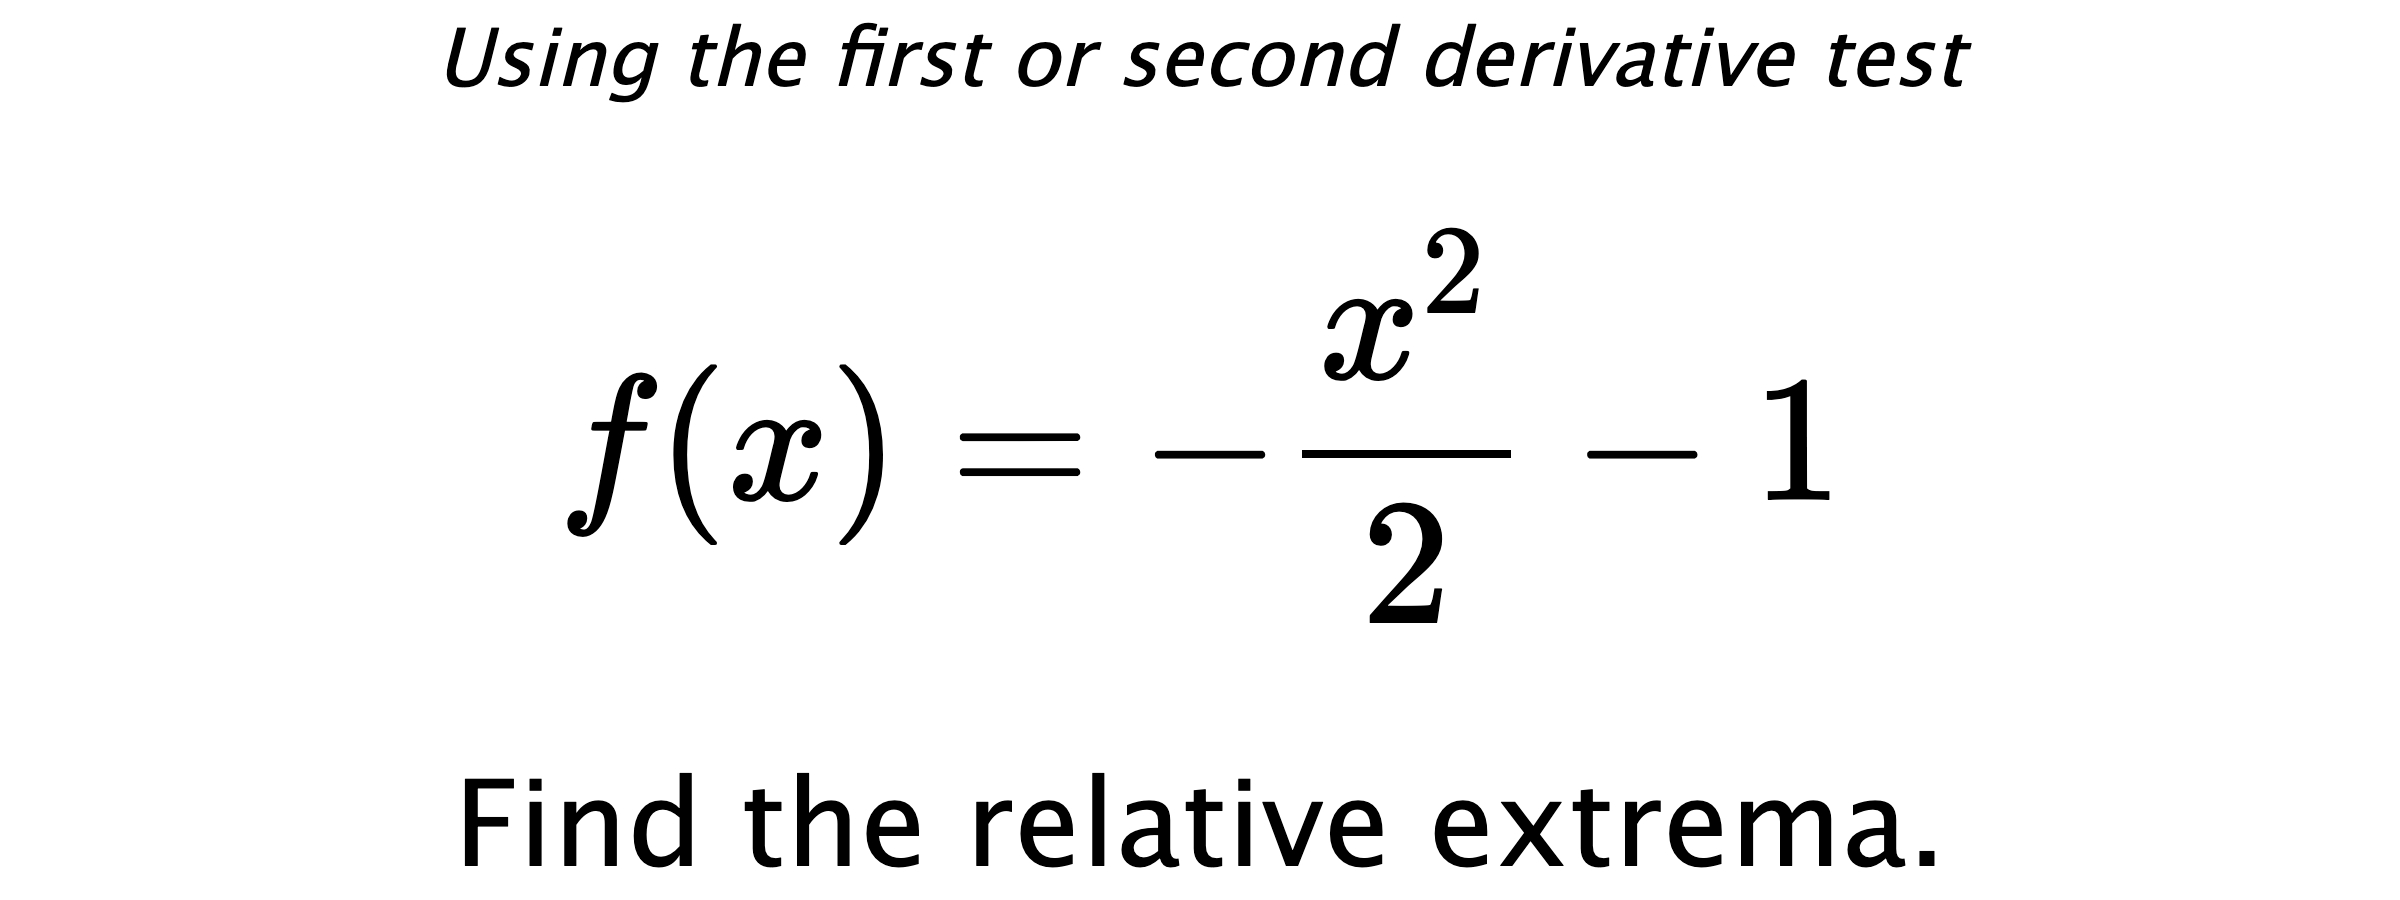 Using the first or second derivative test $$ f(x)=-\frac{x^2}{2}-1 $$ Find the relative extrema.